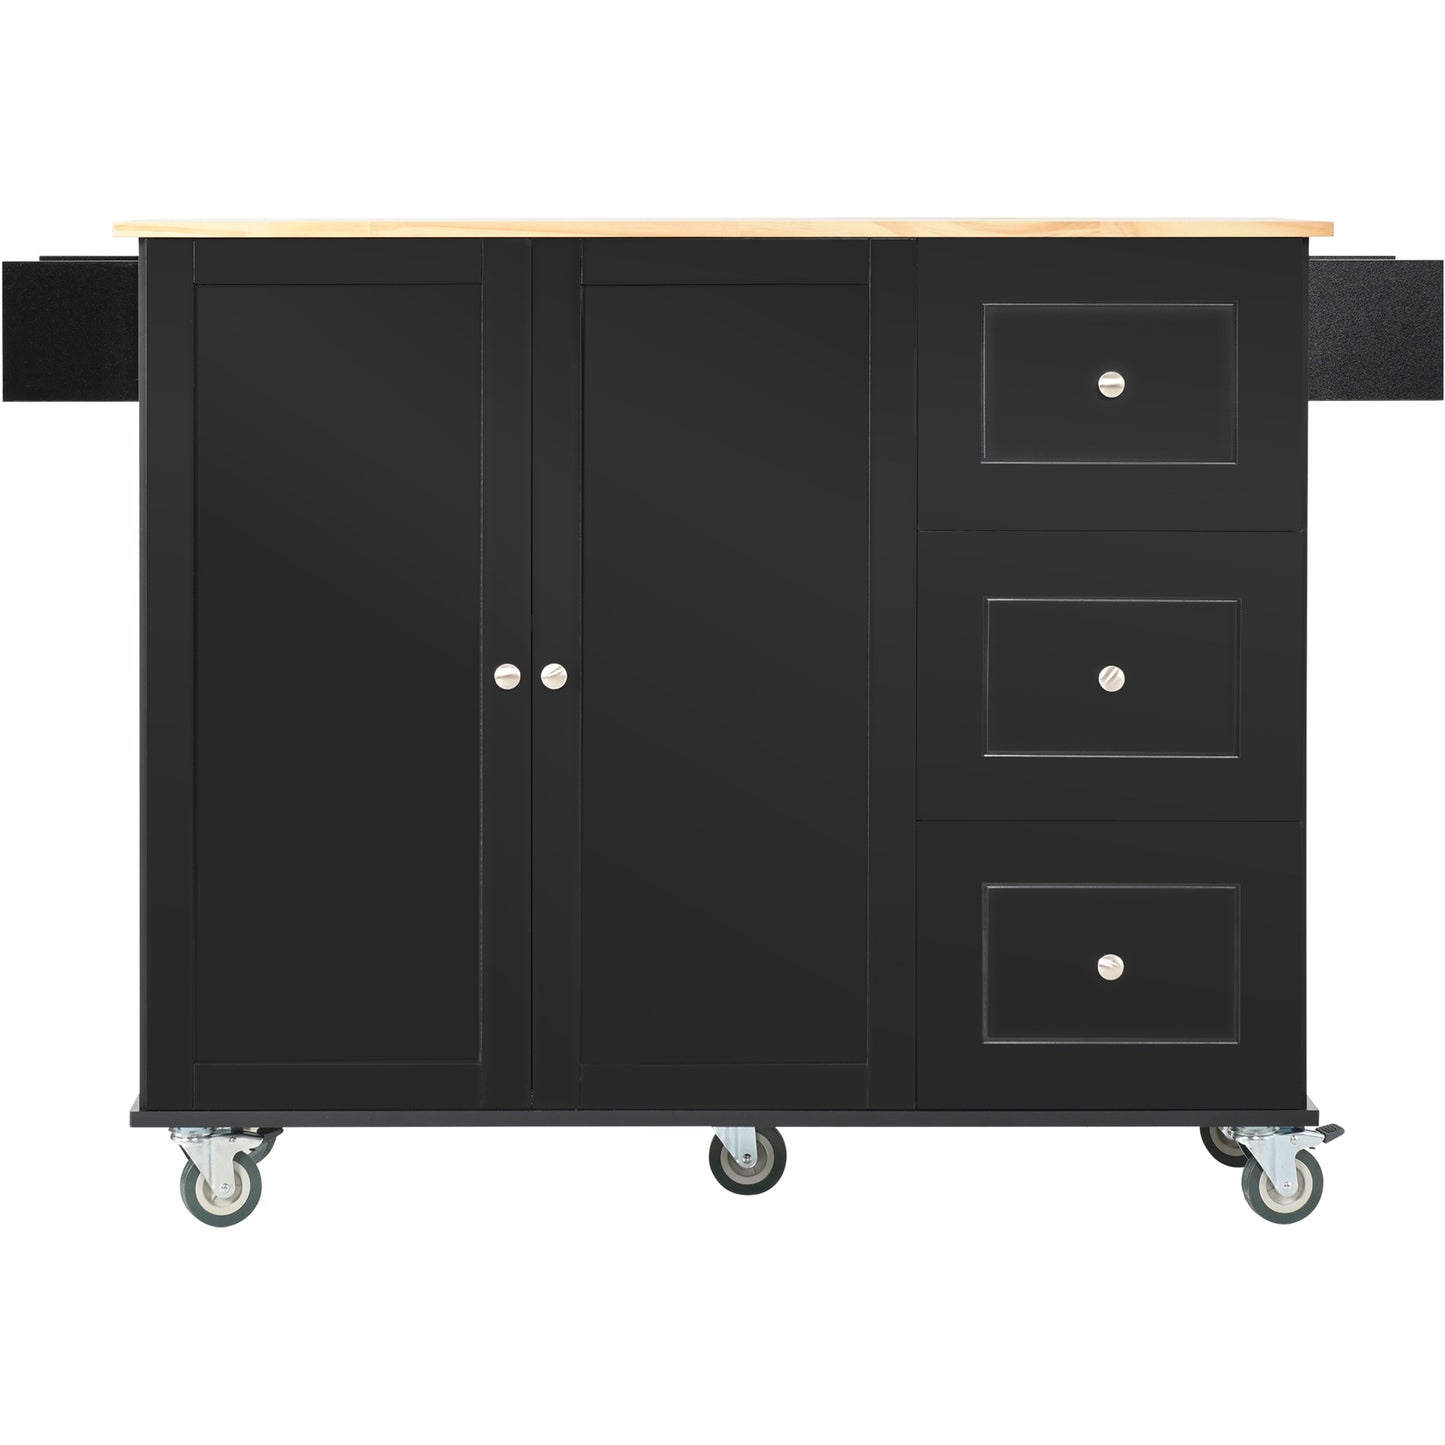 Rolling Mobile Kitchen Island with Solid Wood Top and Locking Wheels,52.7 Inch Width,Storage Cabinet and Drop Leaf Breakfast Bar,Spice Rack, Towel Rack & Drawer (Black)